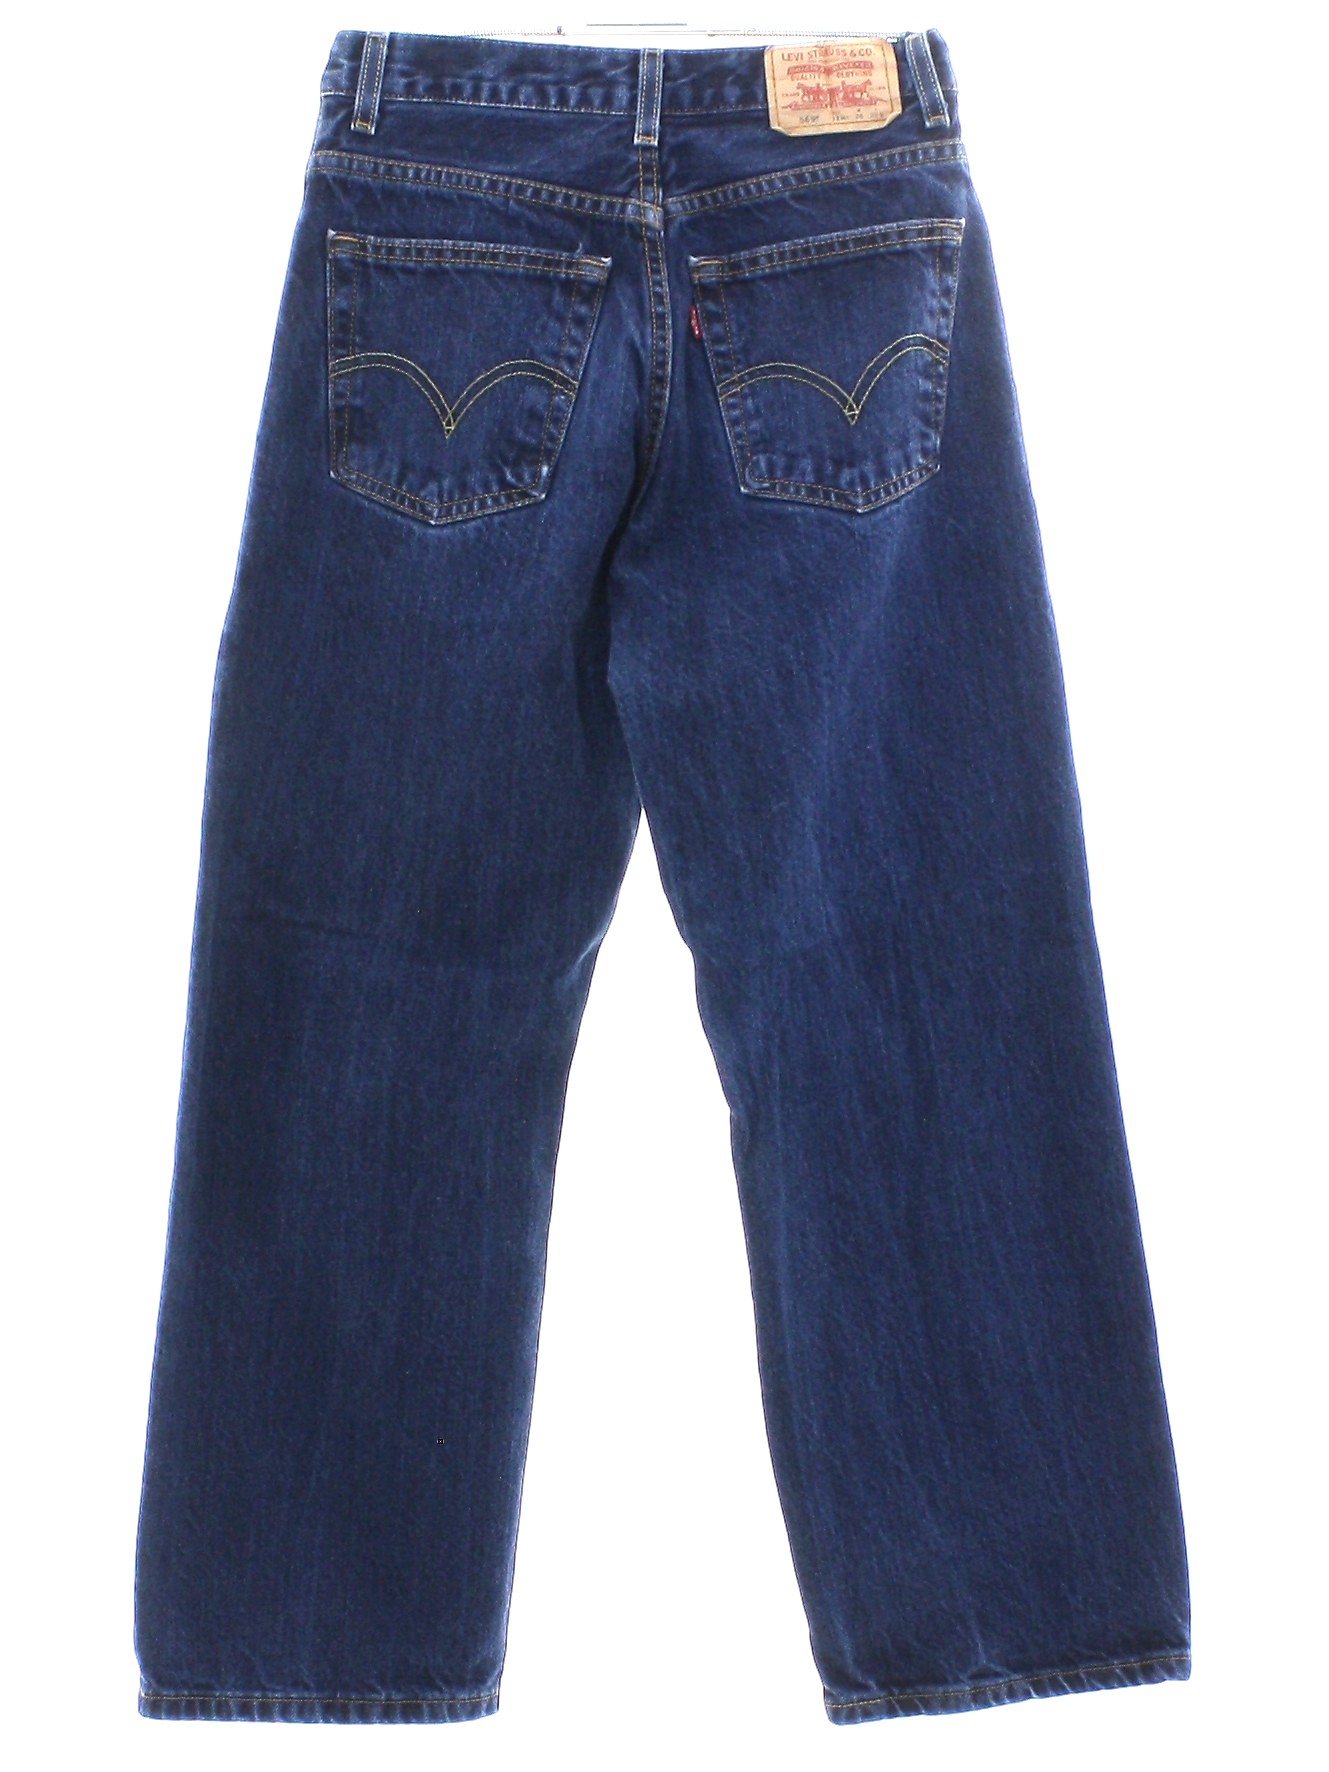 Vintage Levis 569 90's Pants: 90s or newer -Levis 569- Womens slightly  faded dark blue cotton denim levis 569 straight wide leg loose denim jeans  pants with zipper fly closure with button.